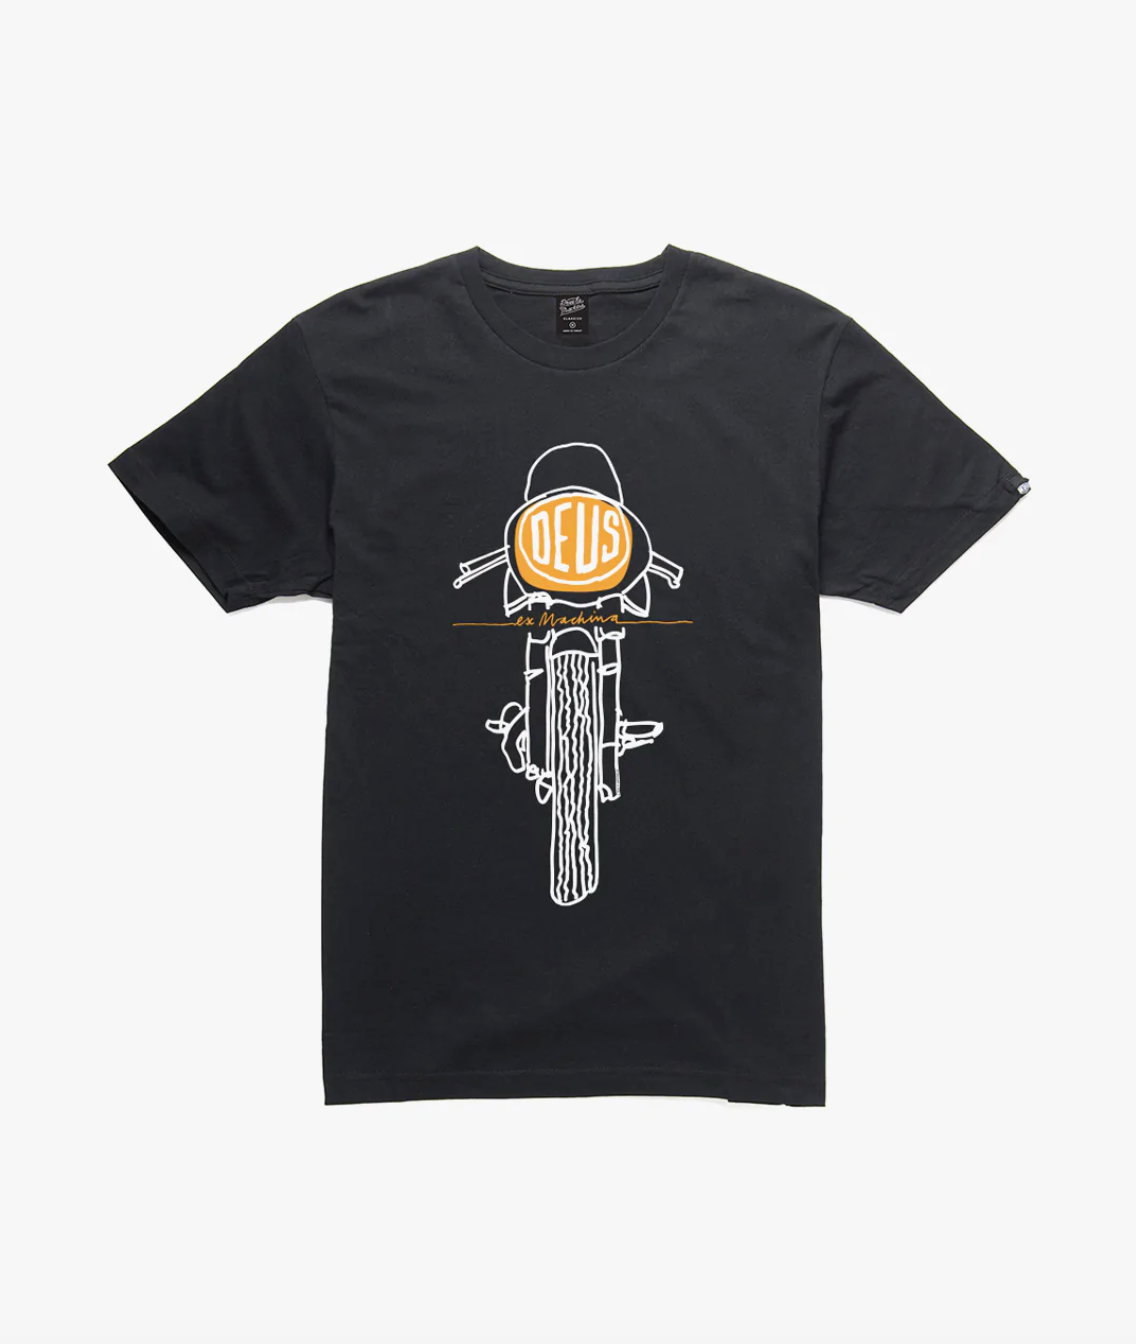 Deus Mens Frontal Matchless Tee